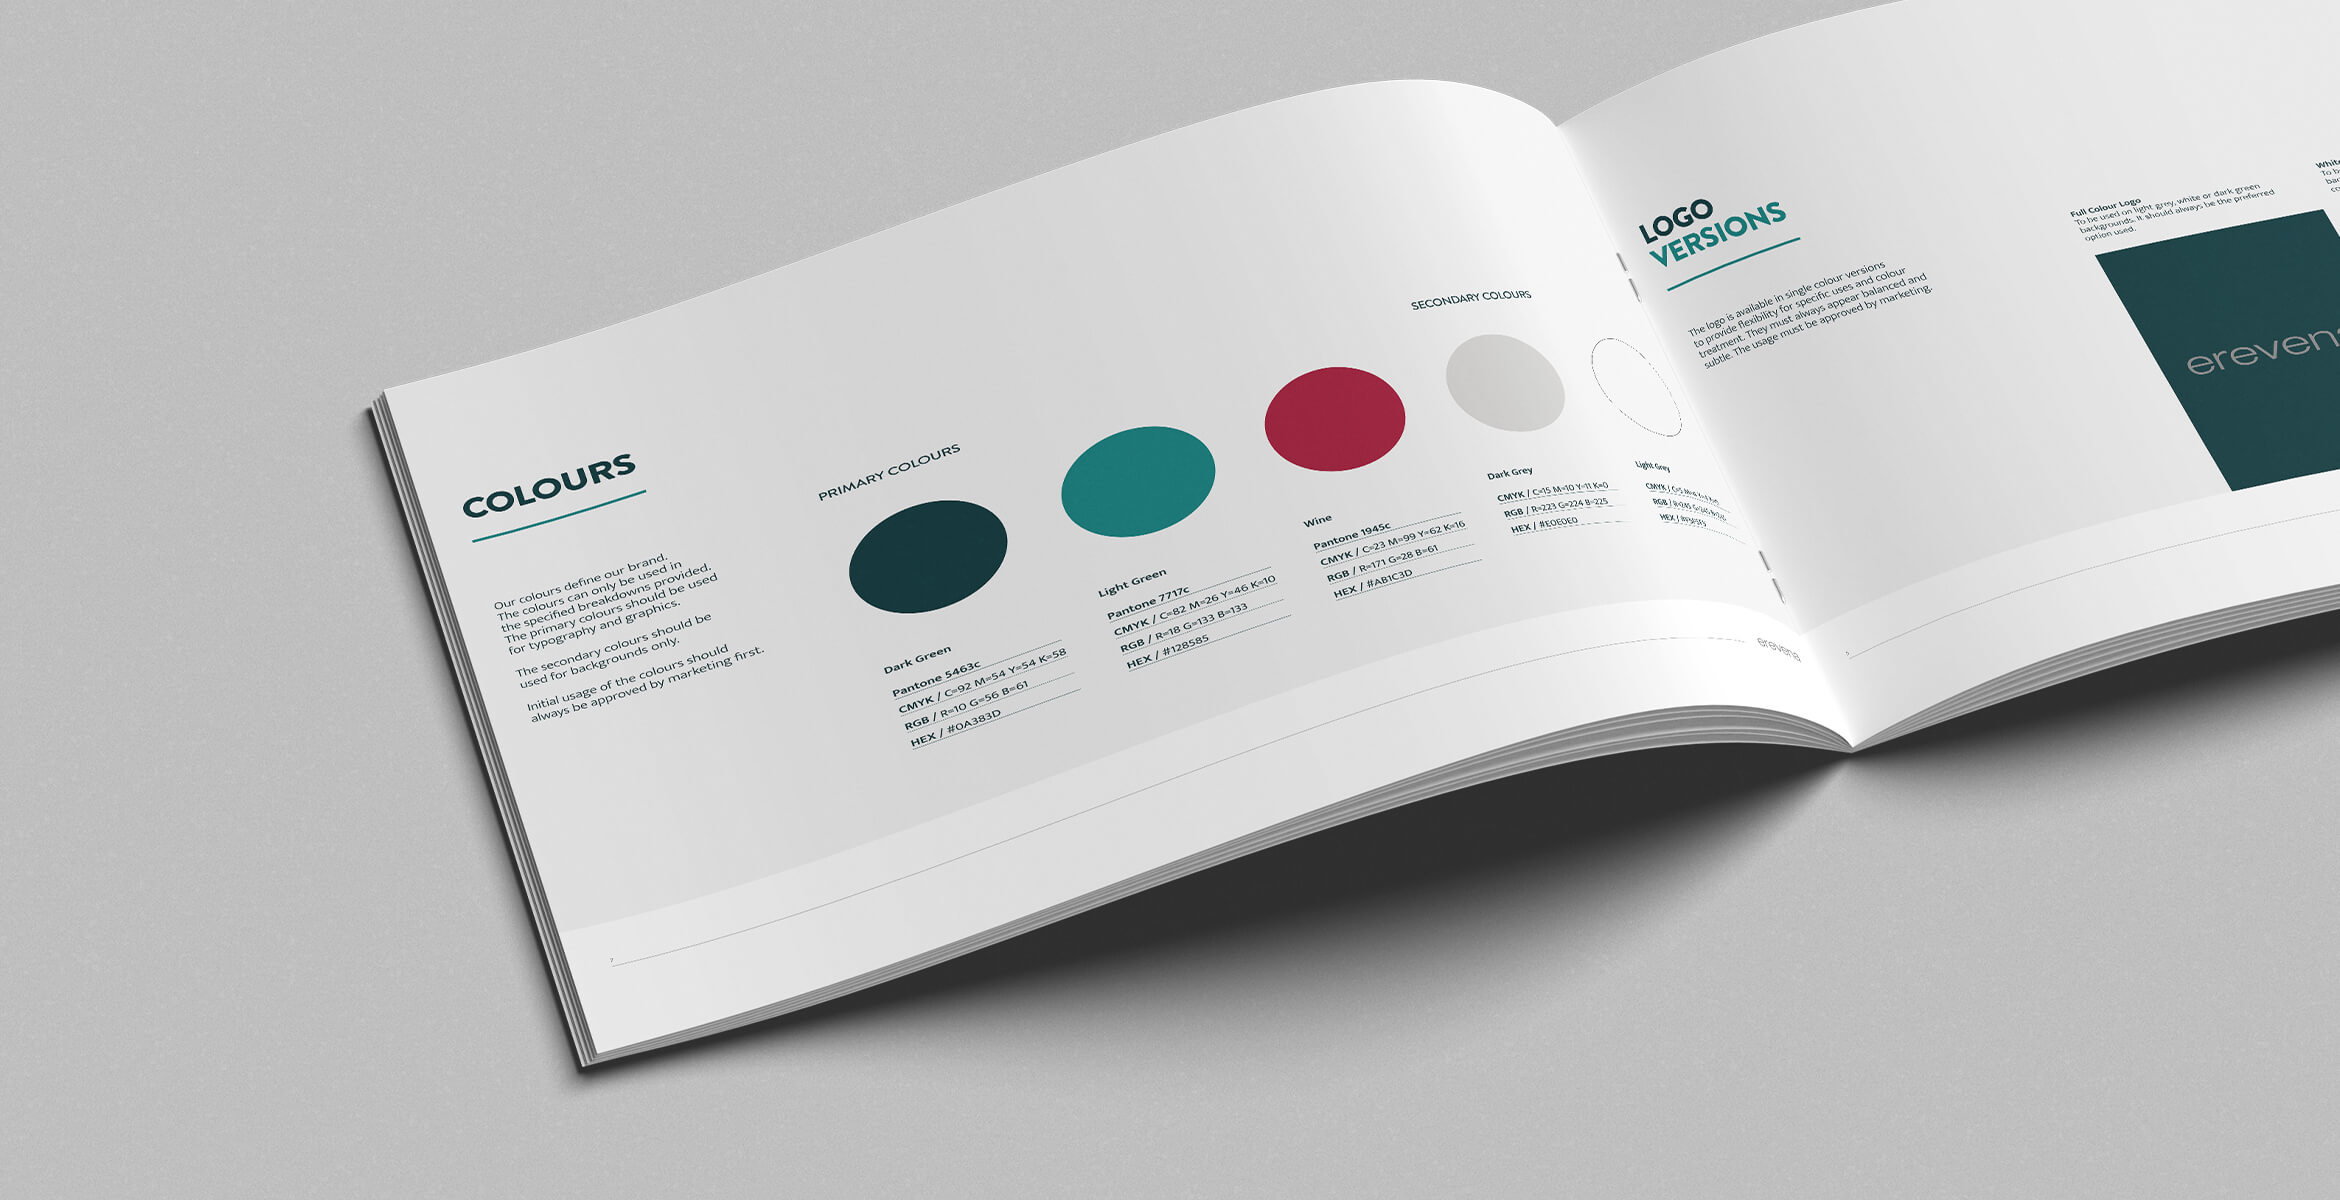 An open booklet showing a page of Erevena's brand guildelines and brand colours.